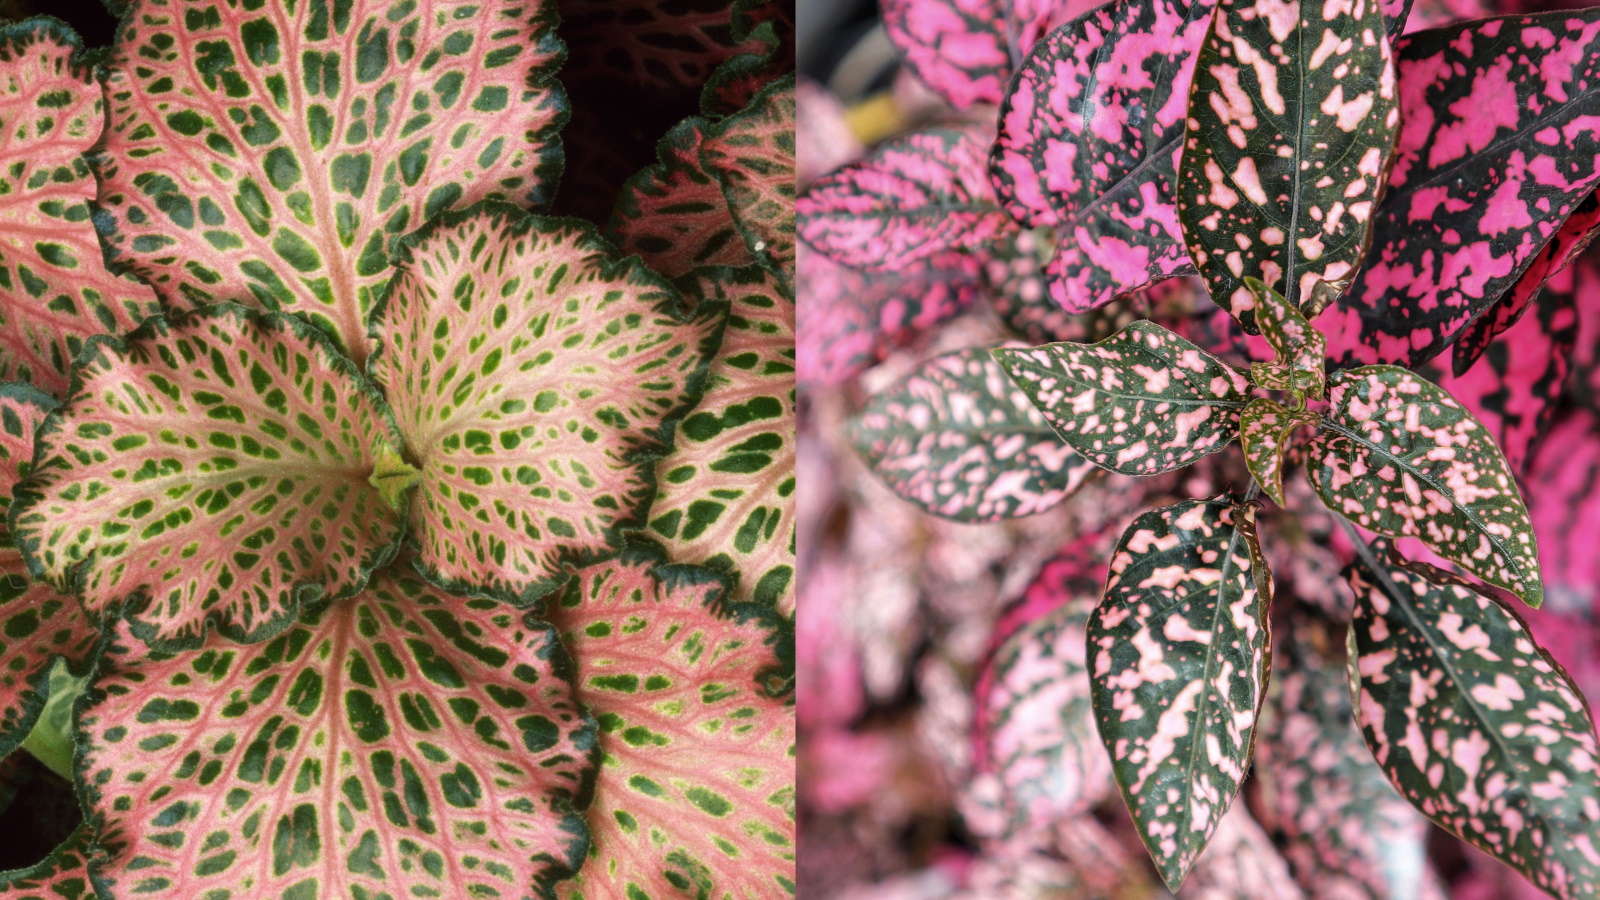 Polka dot plant or fittonia? How to tell these two colorful houseplants apart